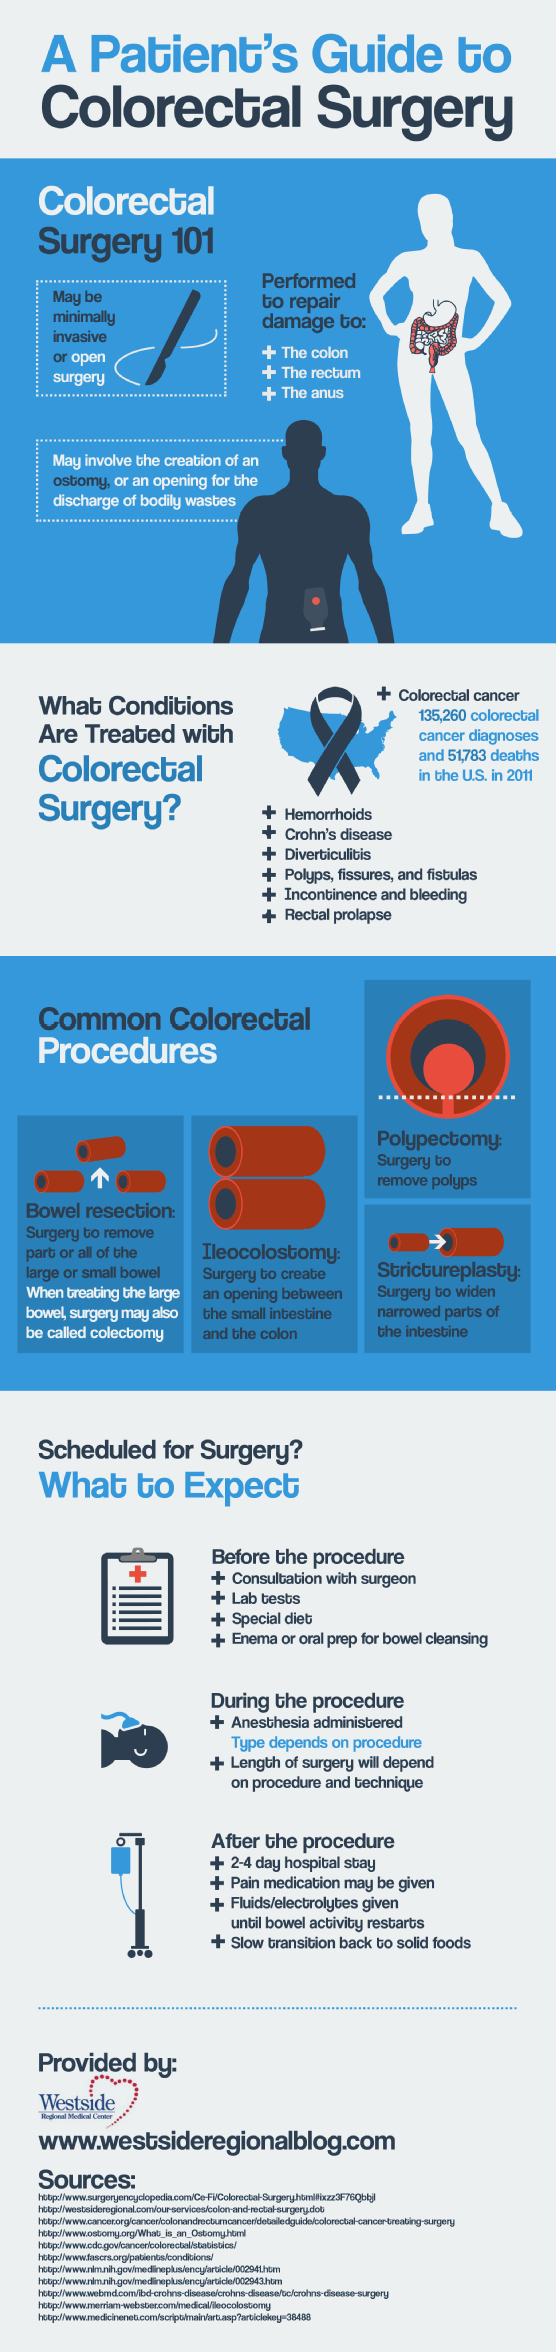 A Patient’s Guide to Colorectal Surgery | Visual.ly